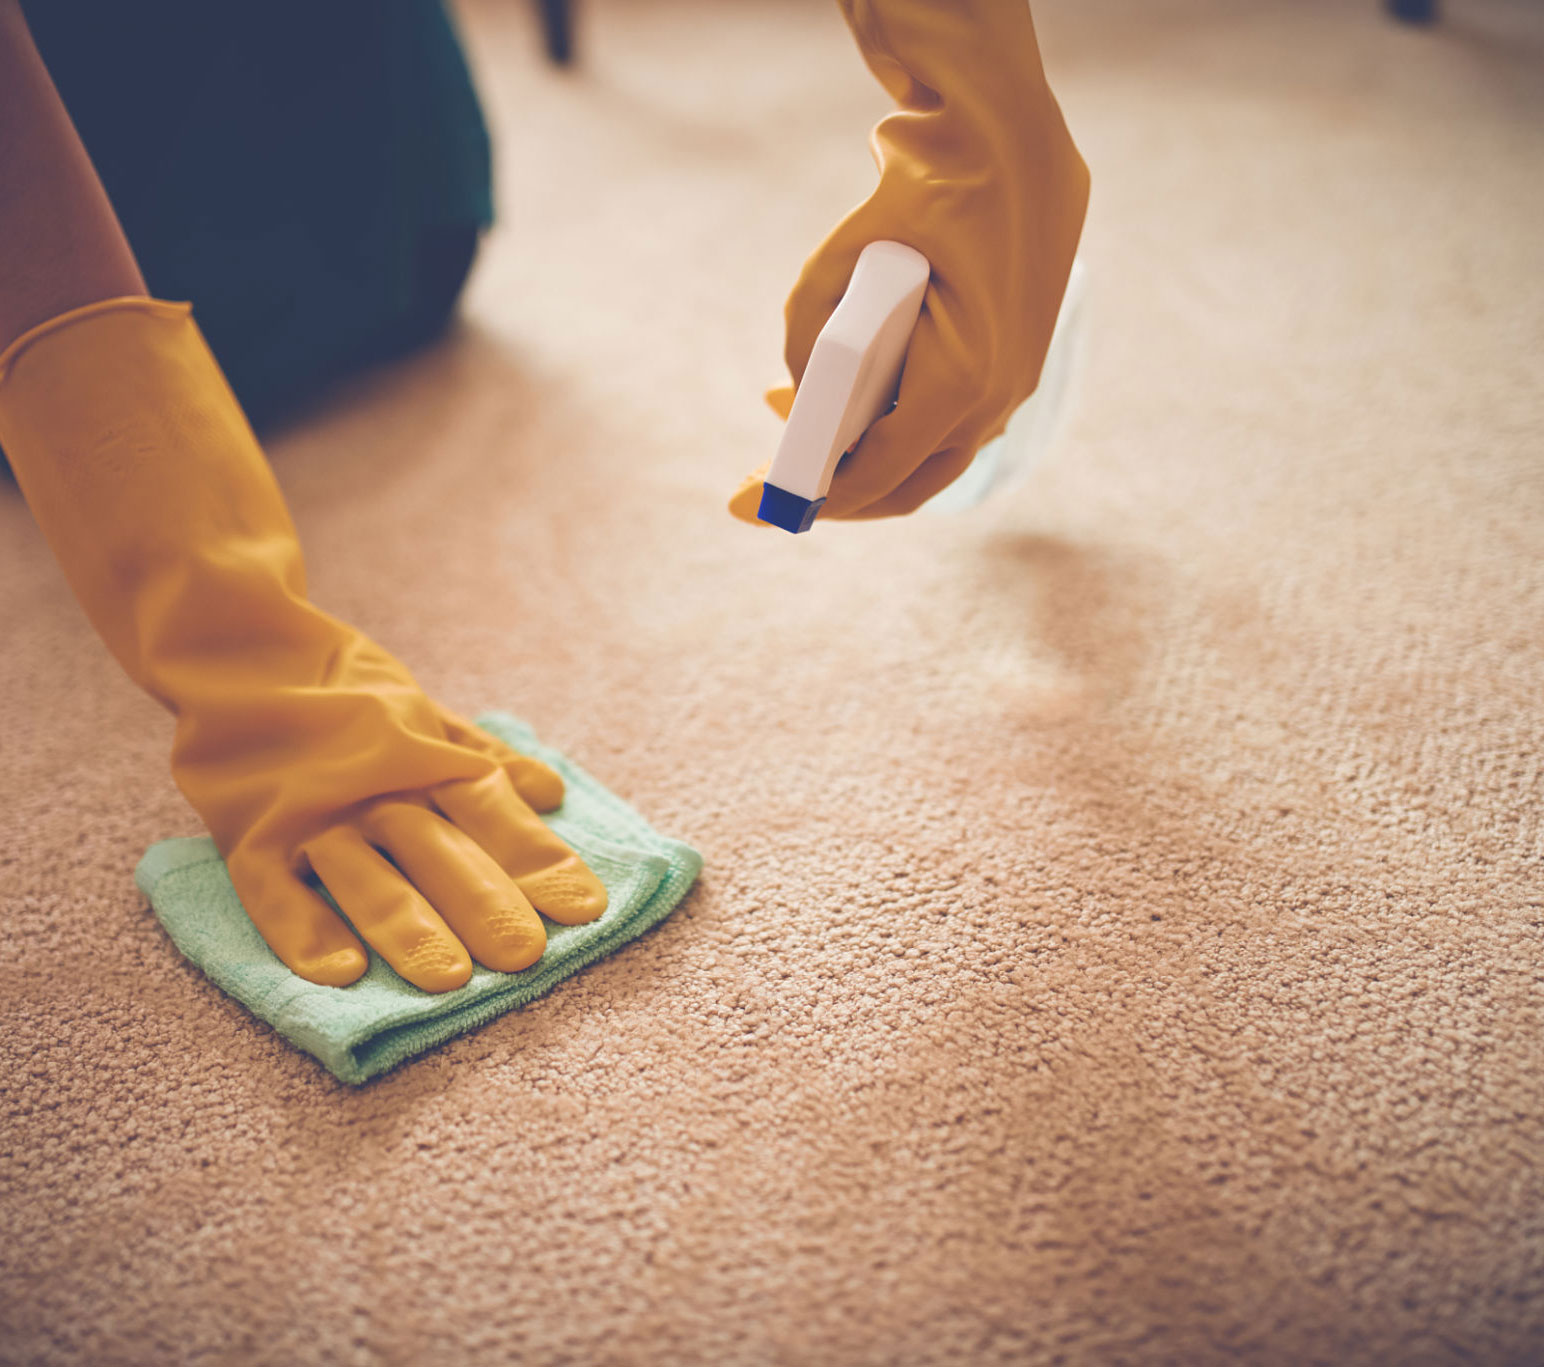 How to Remove Cat Urine from Carpet